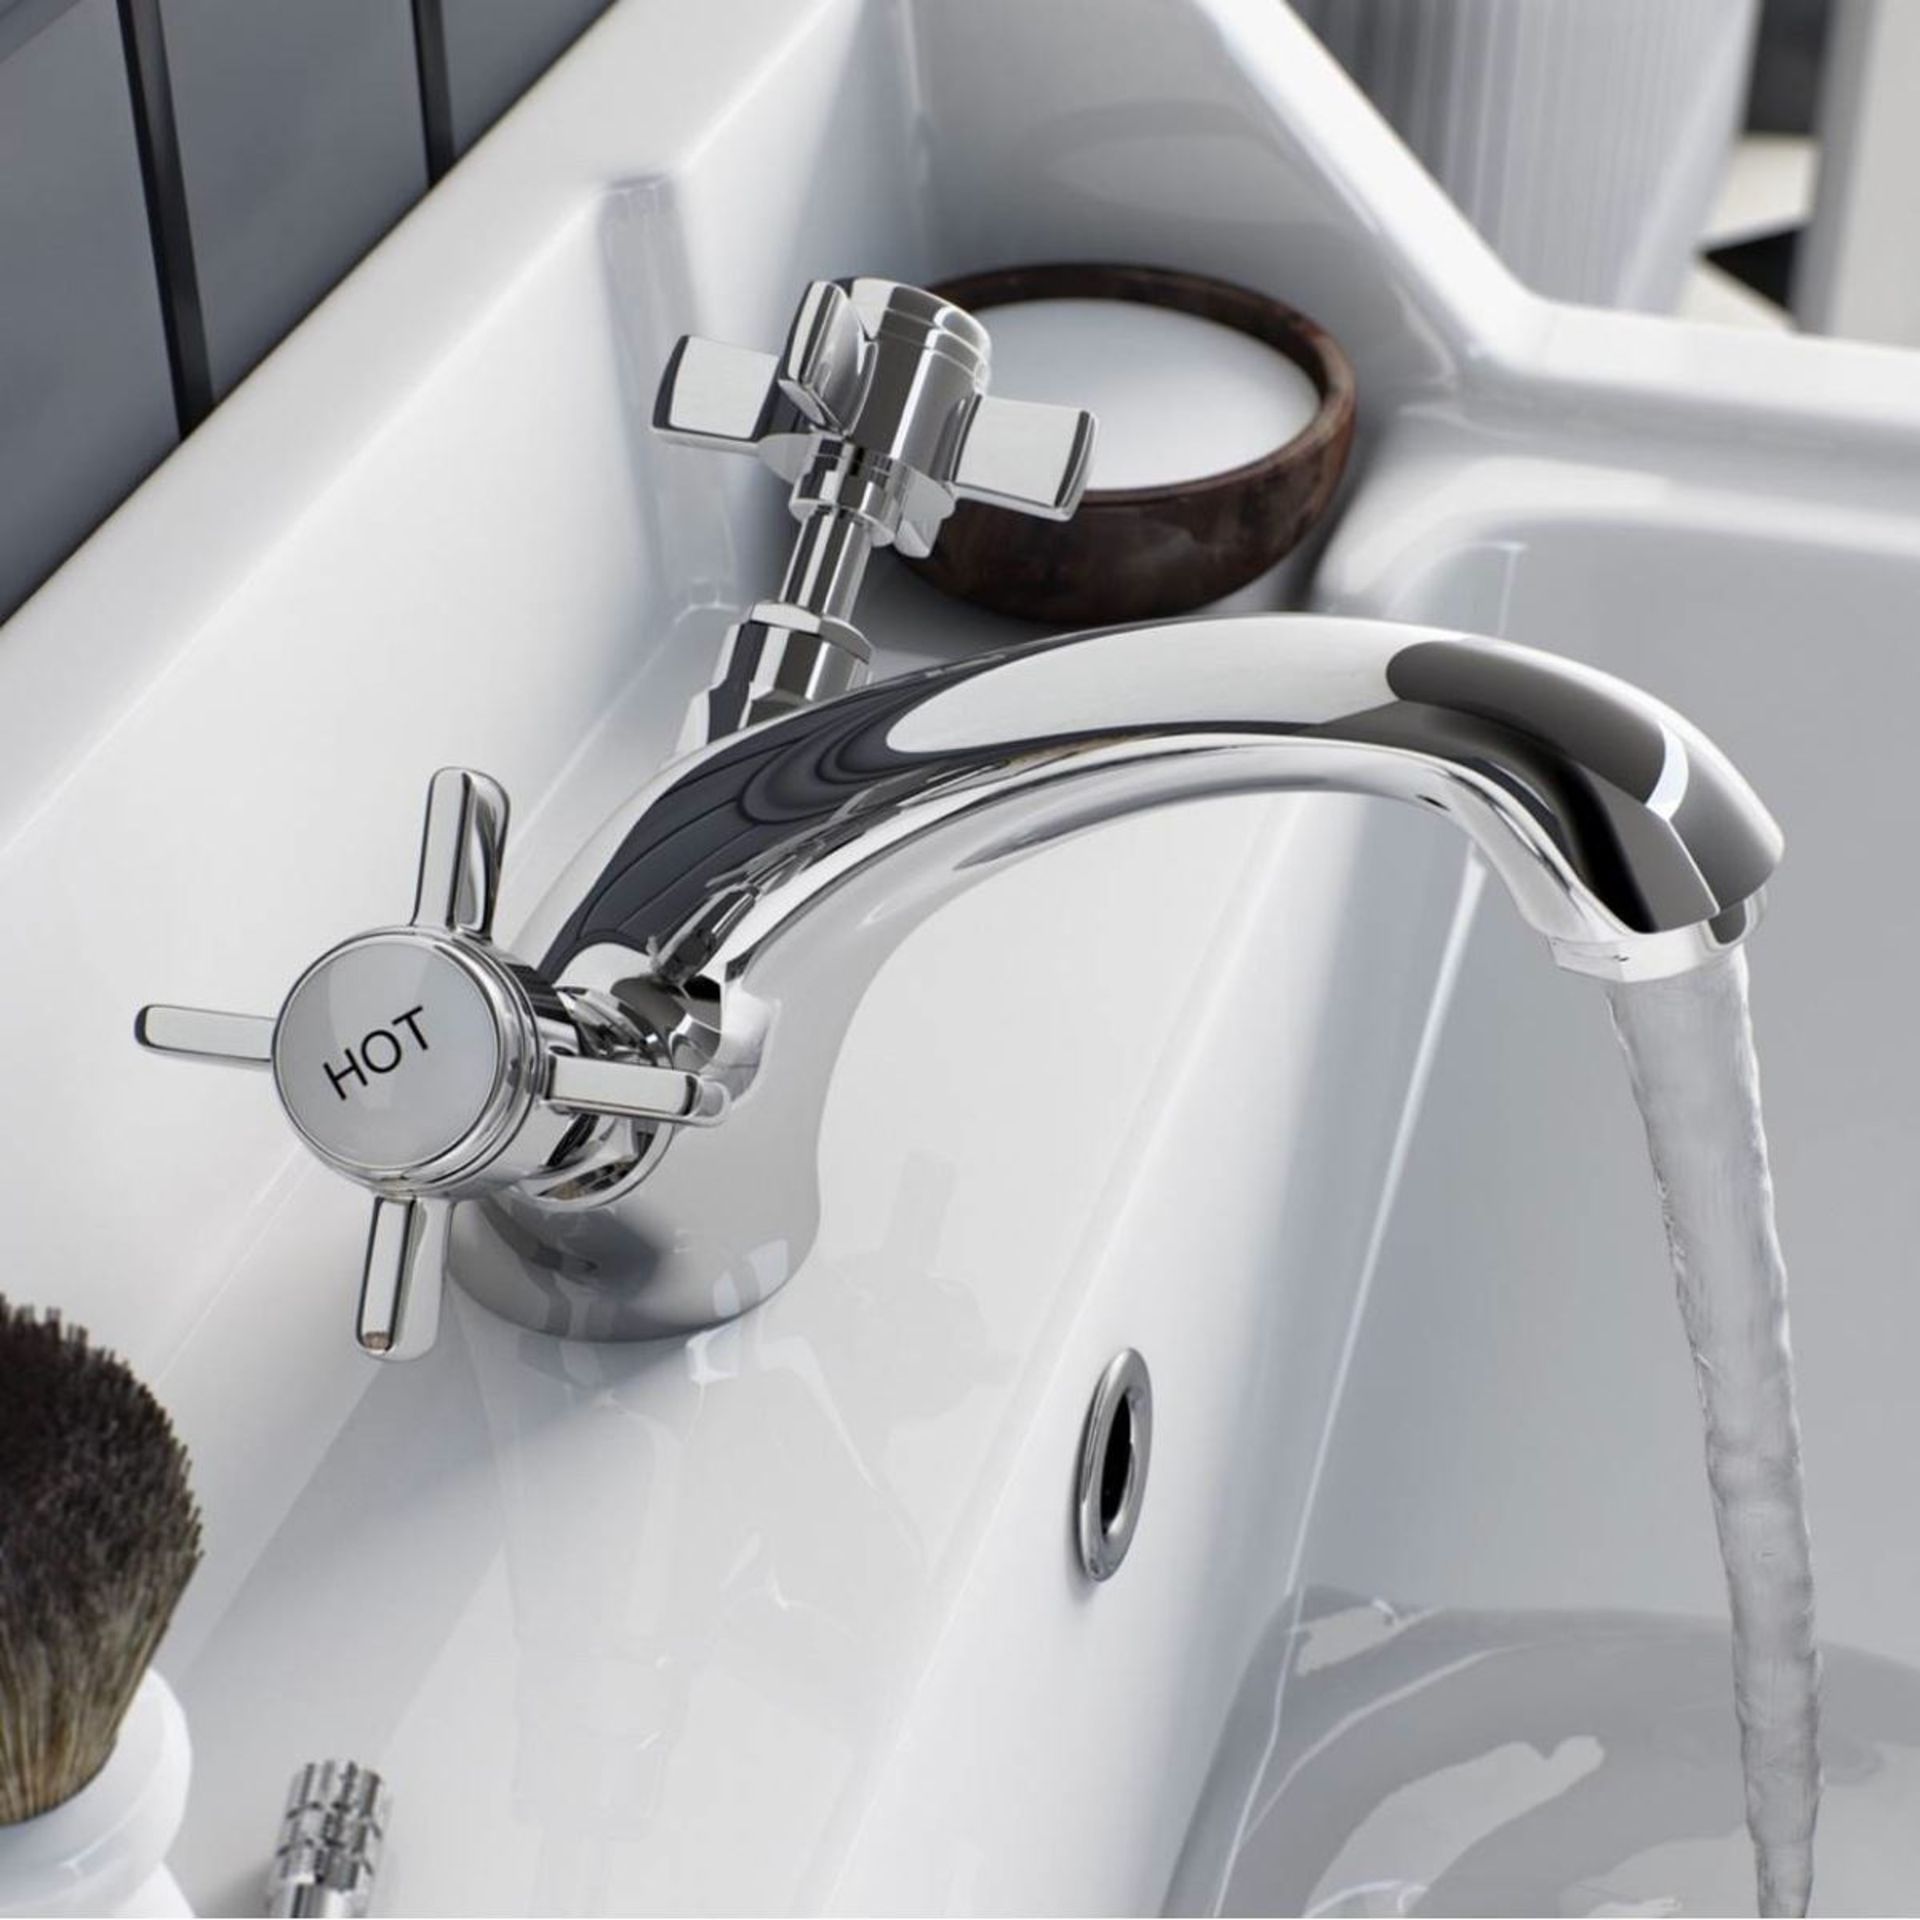 (TT186) TRADITIONAL VICTORIAN BATHROOM CROSS HEAD SINK BASIN MONO MIXER CHROME TAP. Our Grand ... - Image 2 of 3